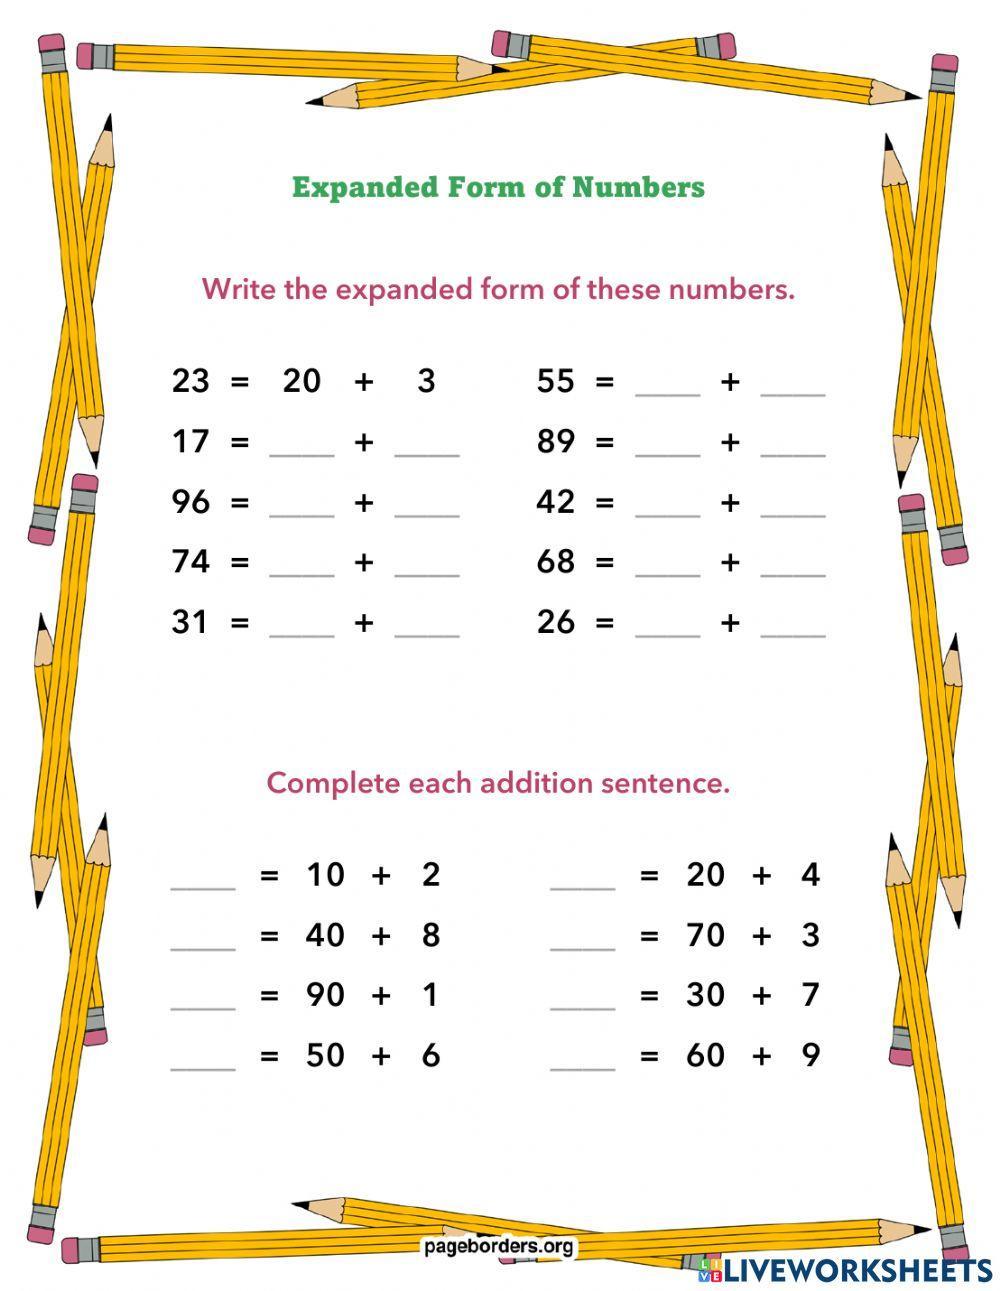 Expanded form of numbers